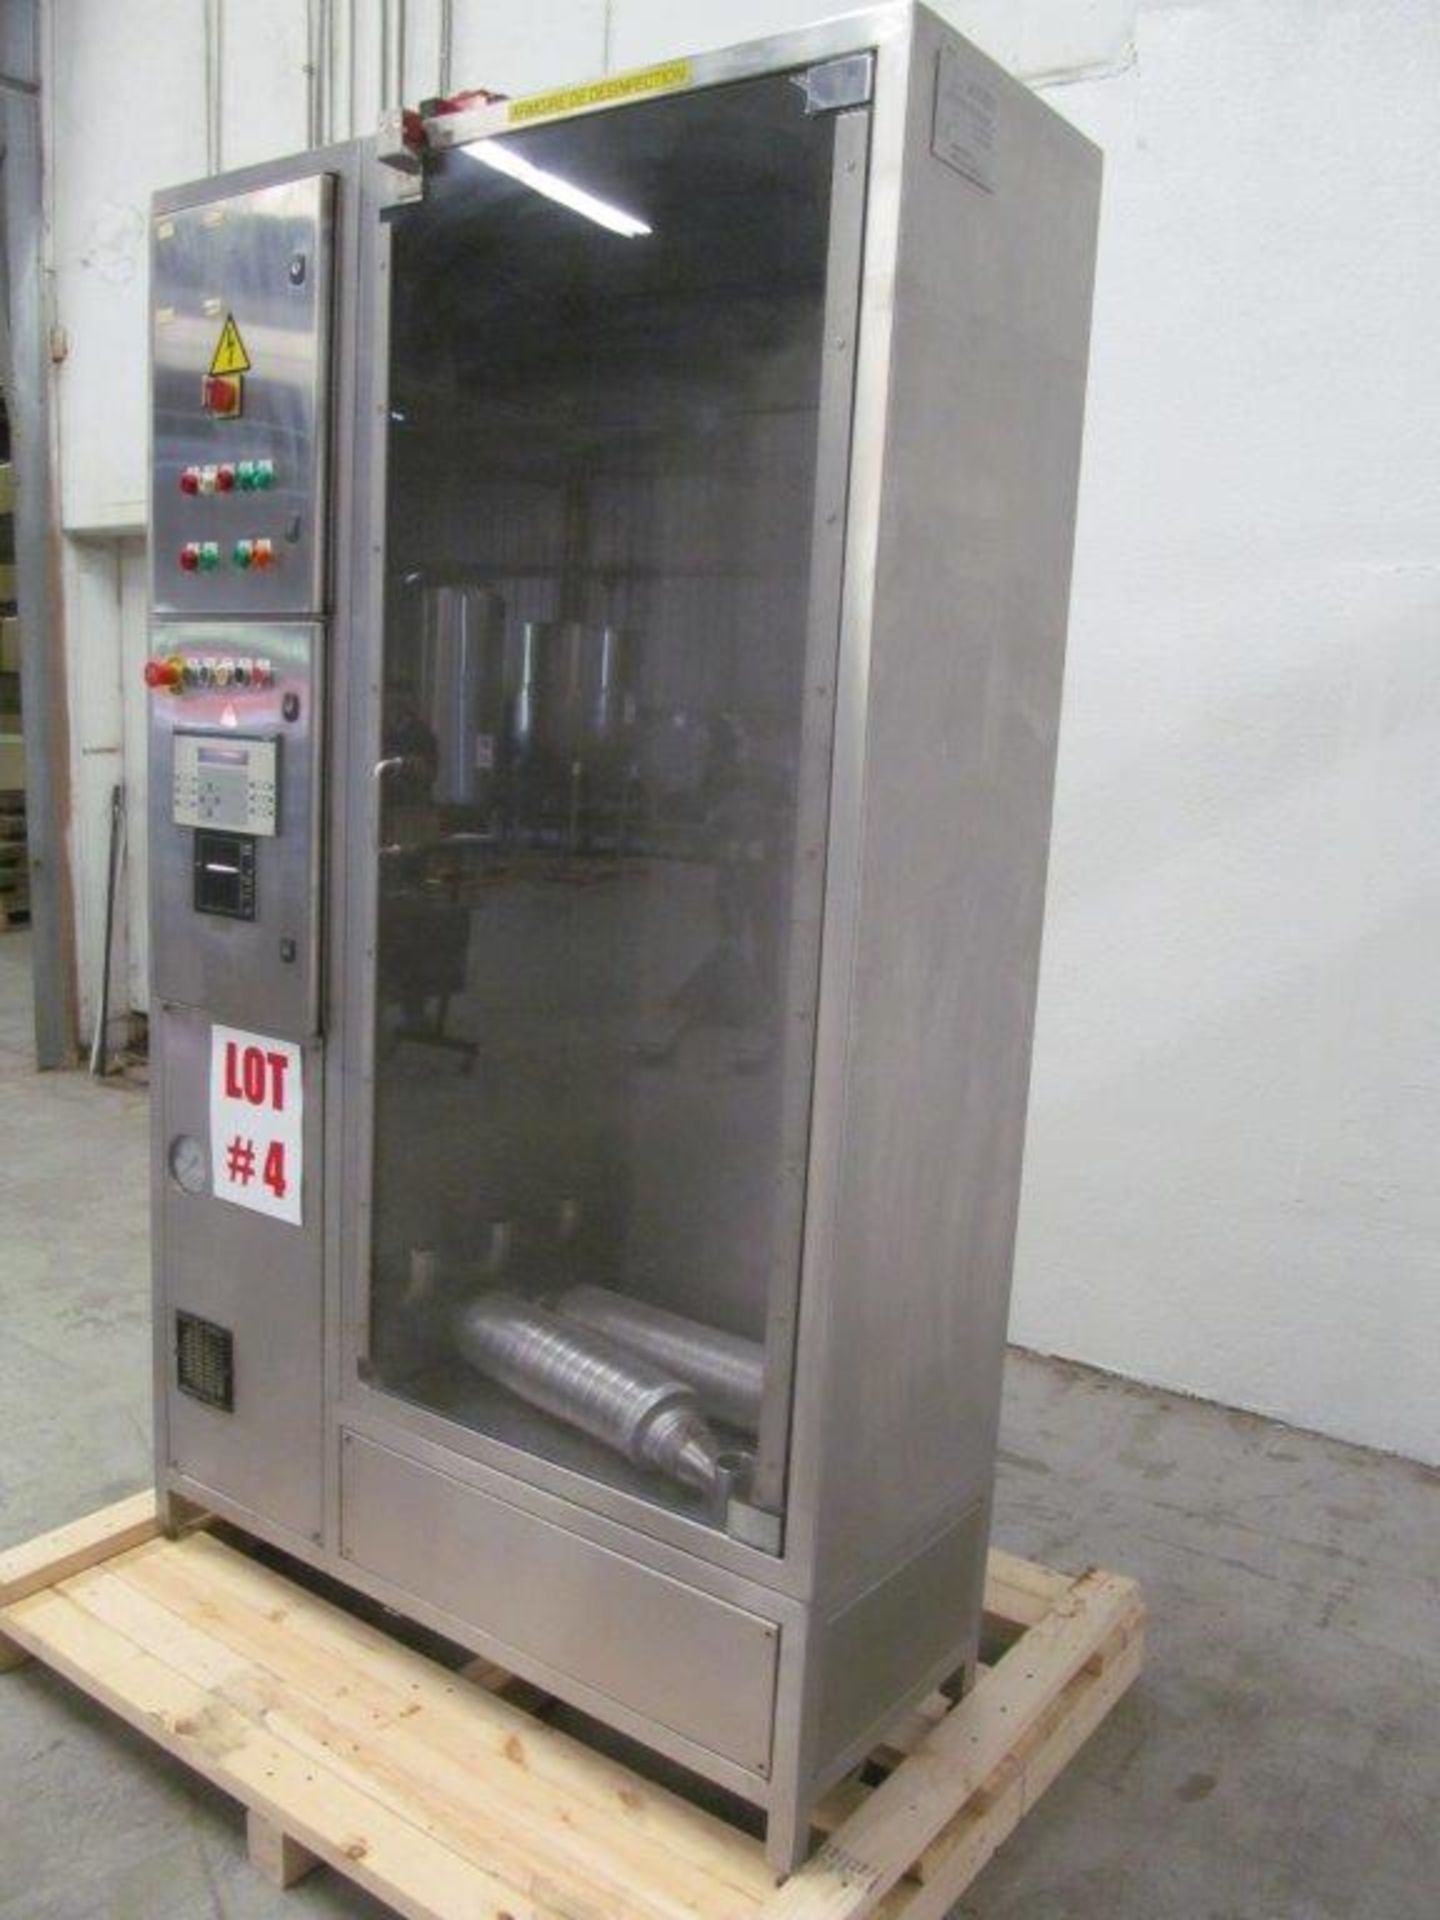 SOLERI THERMAL DESINFECTION CABINET, 200 HOURS, YEAR: 1999, 170 VOLTS, DIMENSION: 4X3X8, WEIGHT: 800 - Image 3 of 6